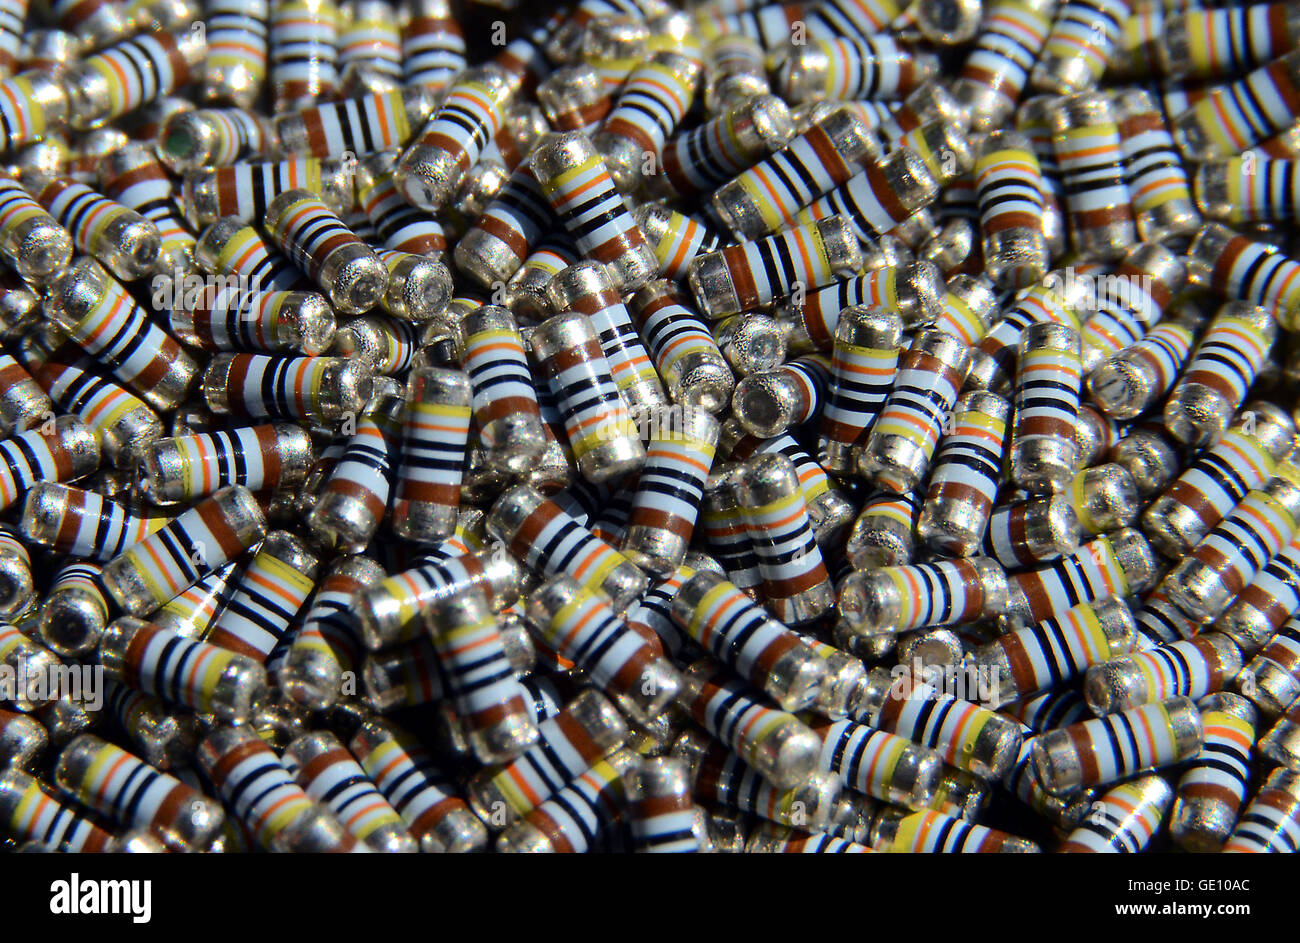 A large number of identical new unused SMD resistors. Or wait, are they all identical? Find the deviant! Stock Photo